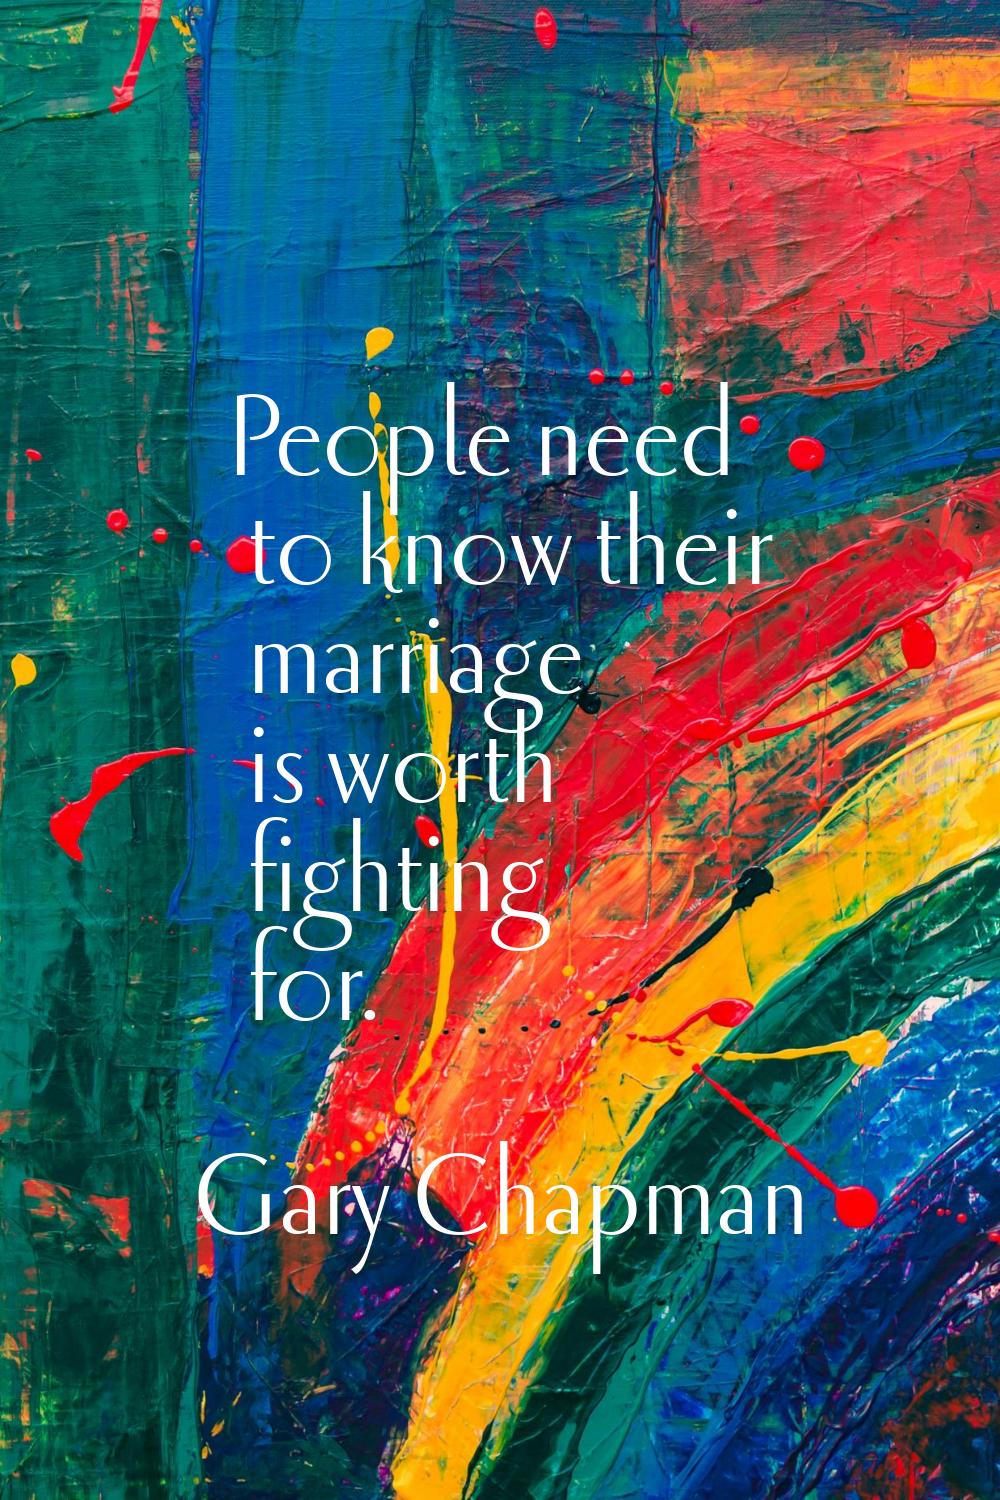 People need to know their marriage is worth fighting for.